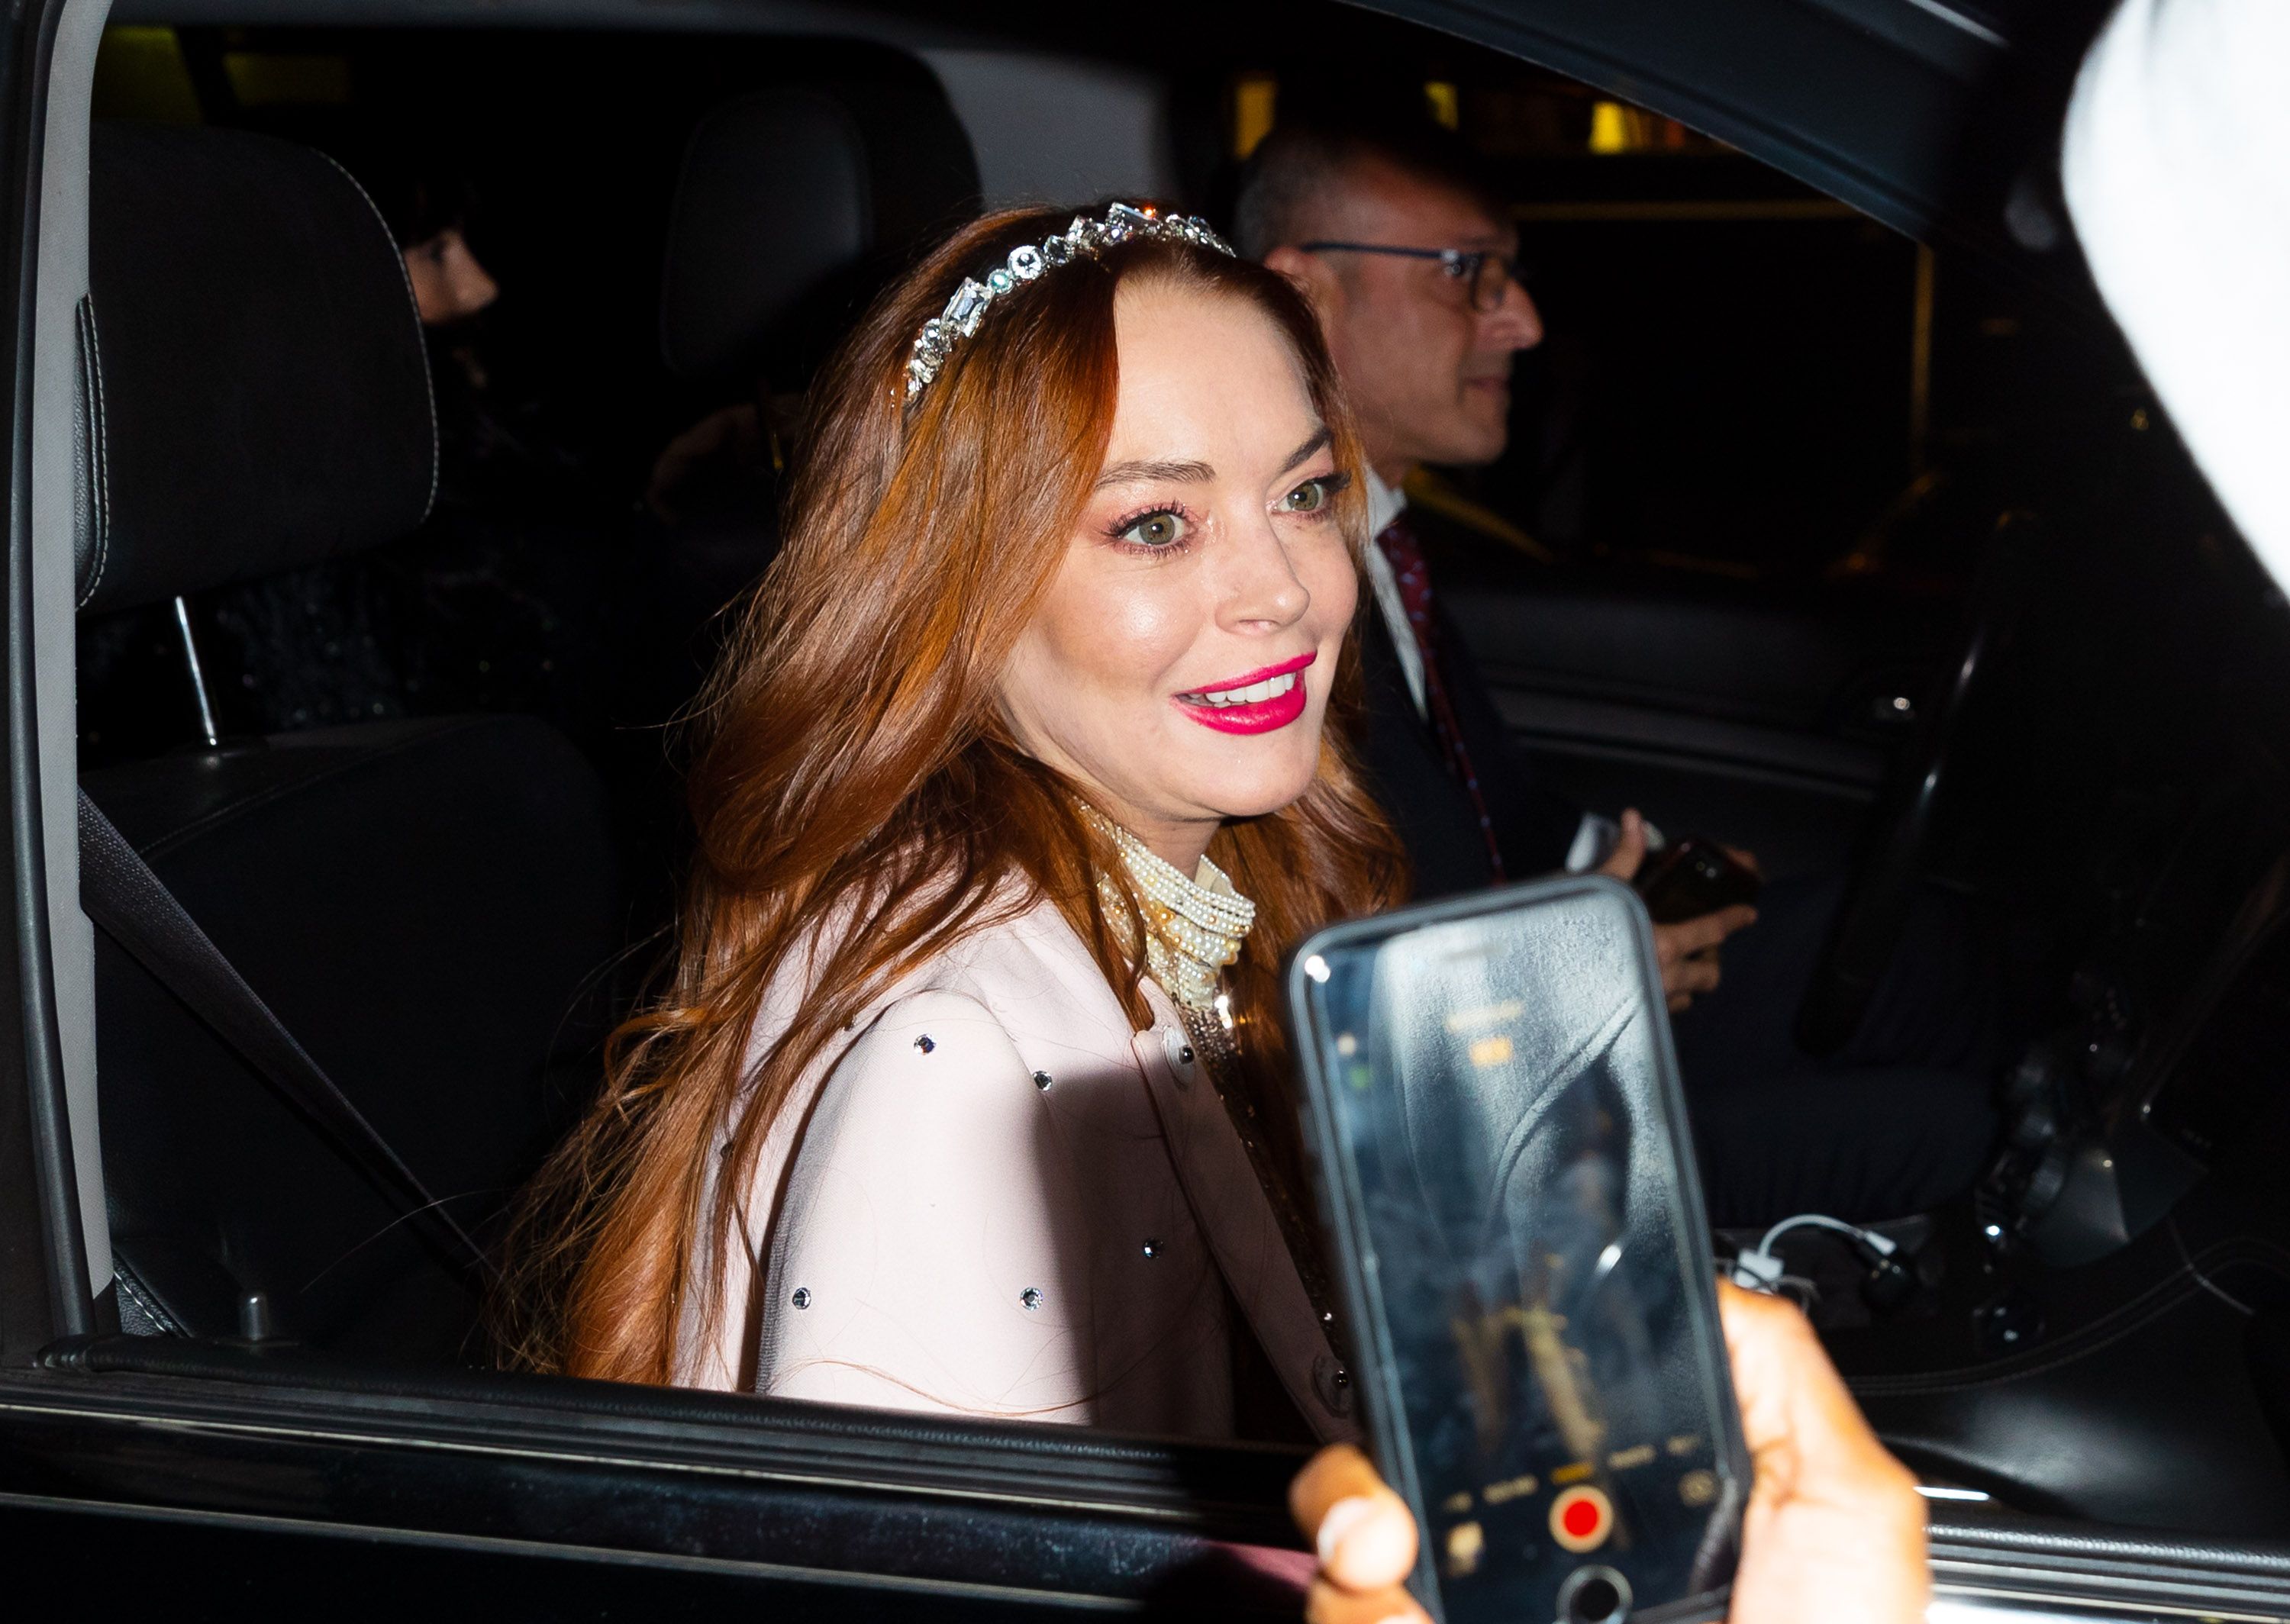 Lindsay Lohan out and about on October 25, 2019 in New York City. | Source: Getty Images